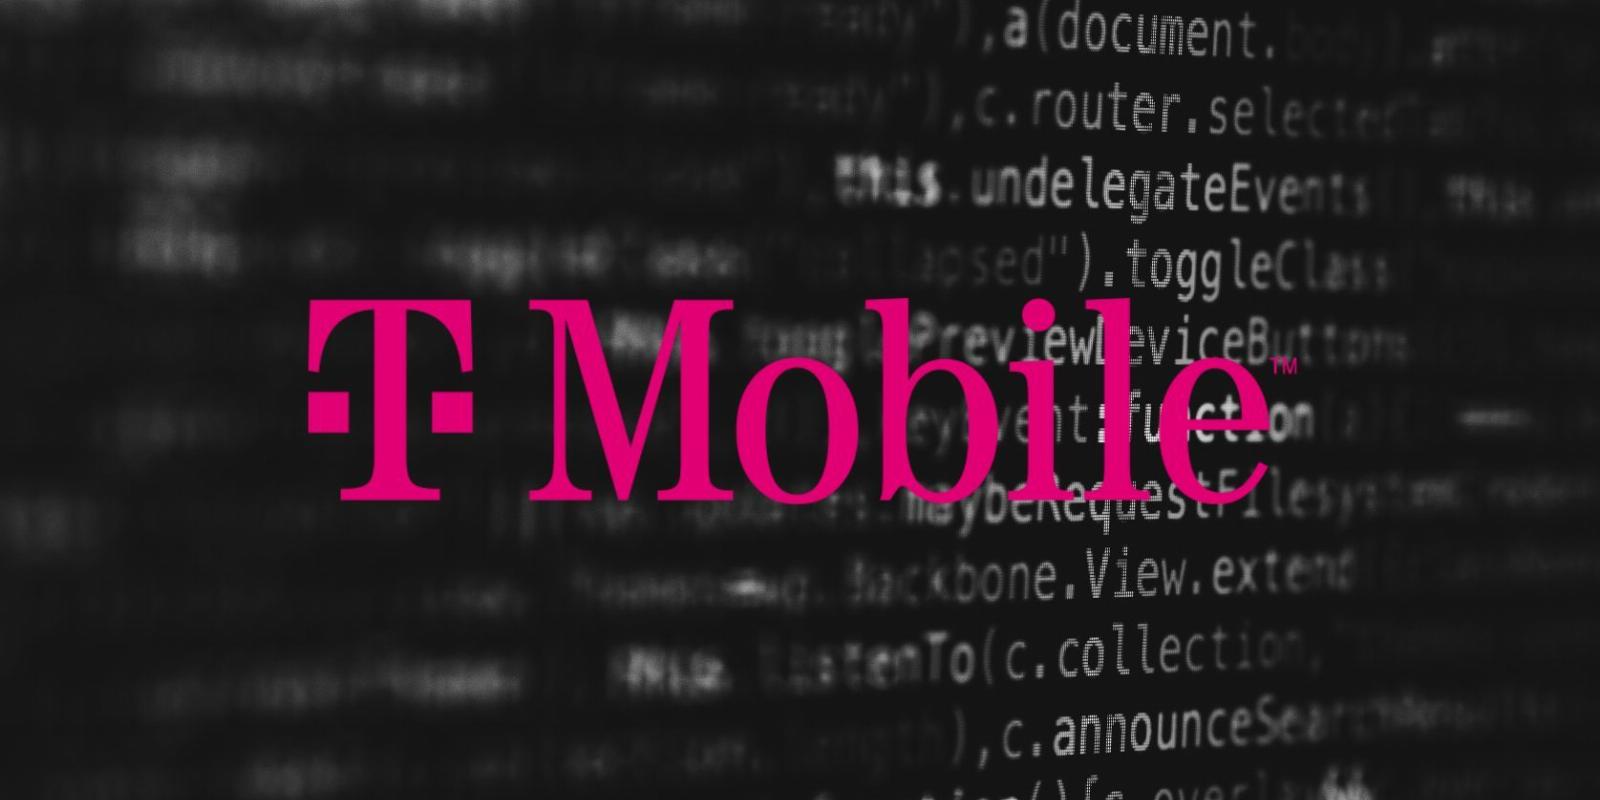 37 Million Customers’ Data Exposed in Huge T-Mobile Breach